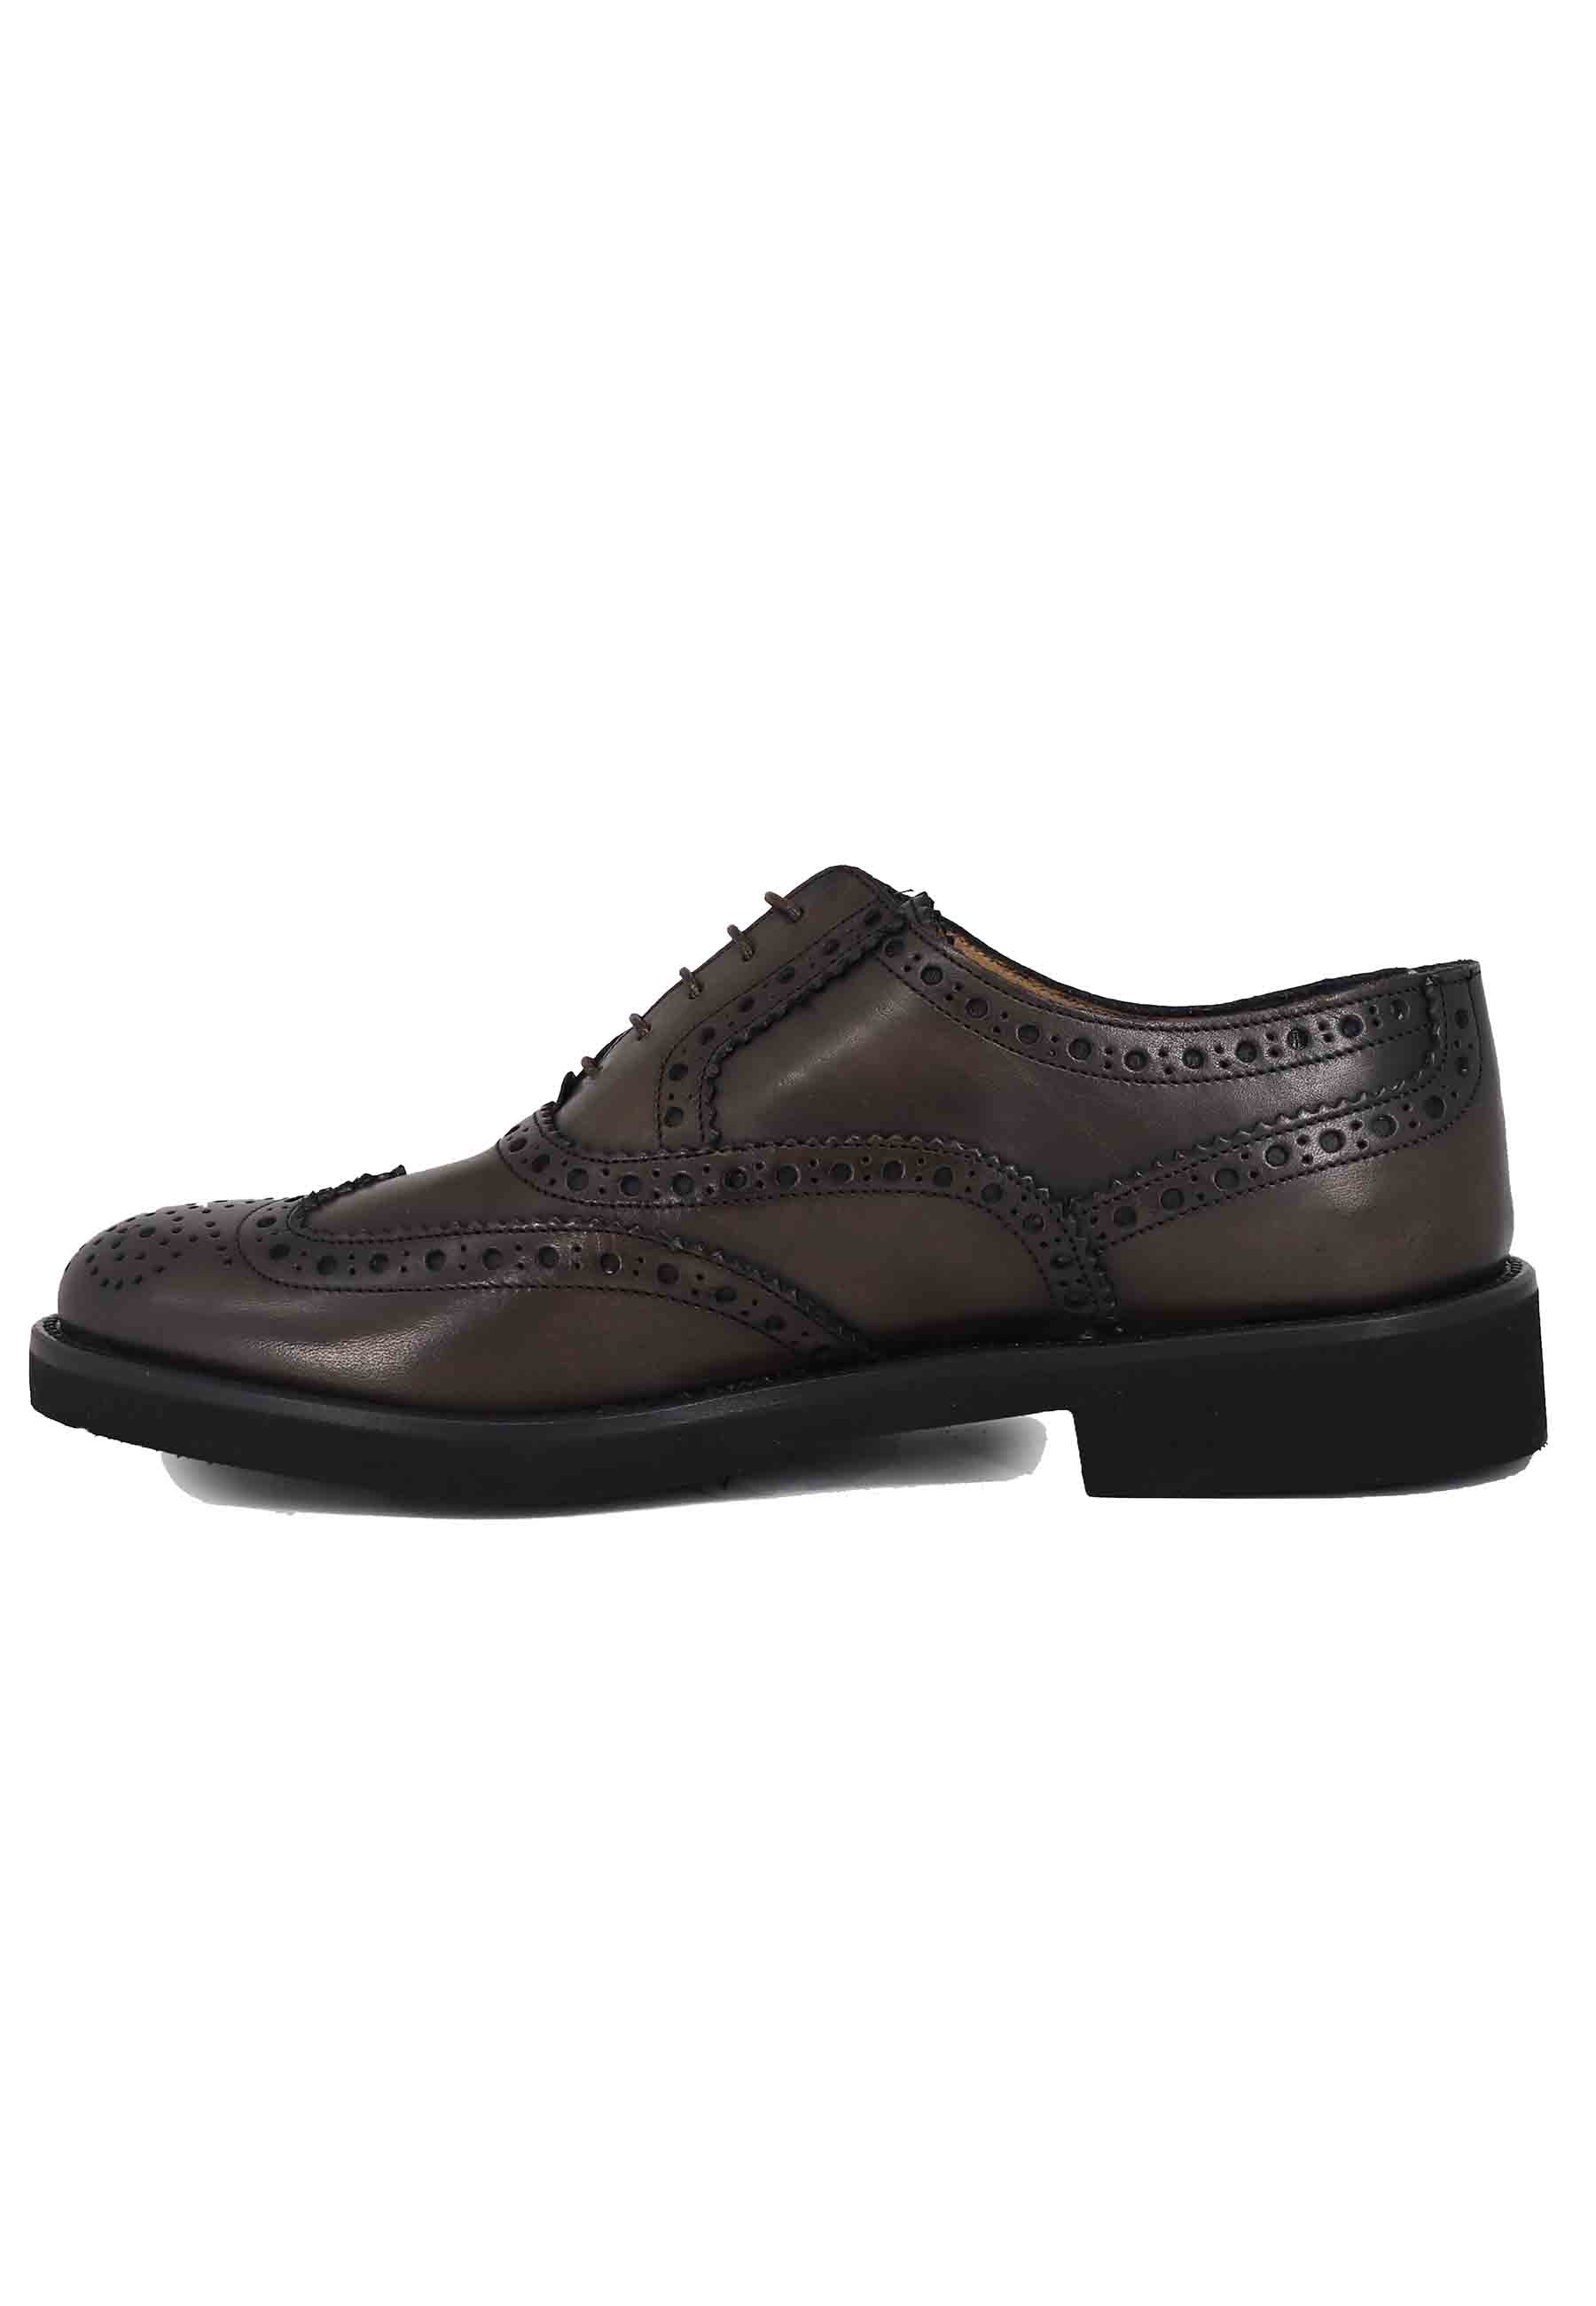 Men's lace-ups in dark brown leather with English stitching and ultra-light rubber sole